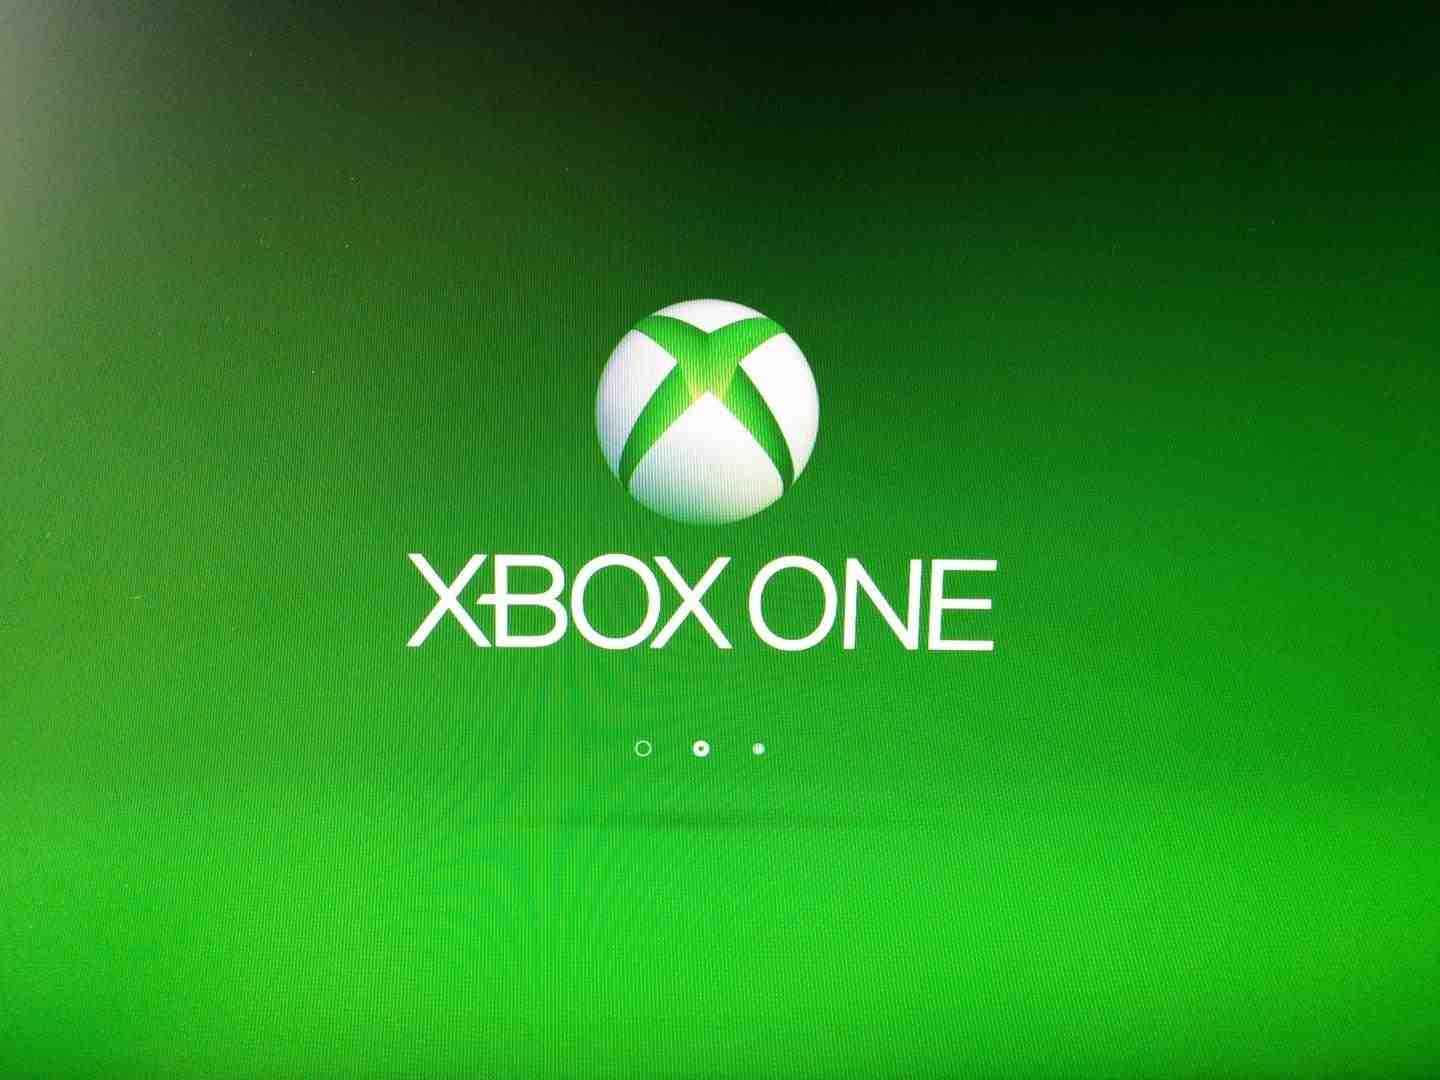 Xbox boot up animation